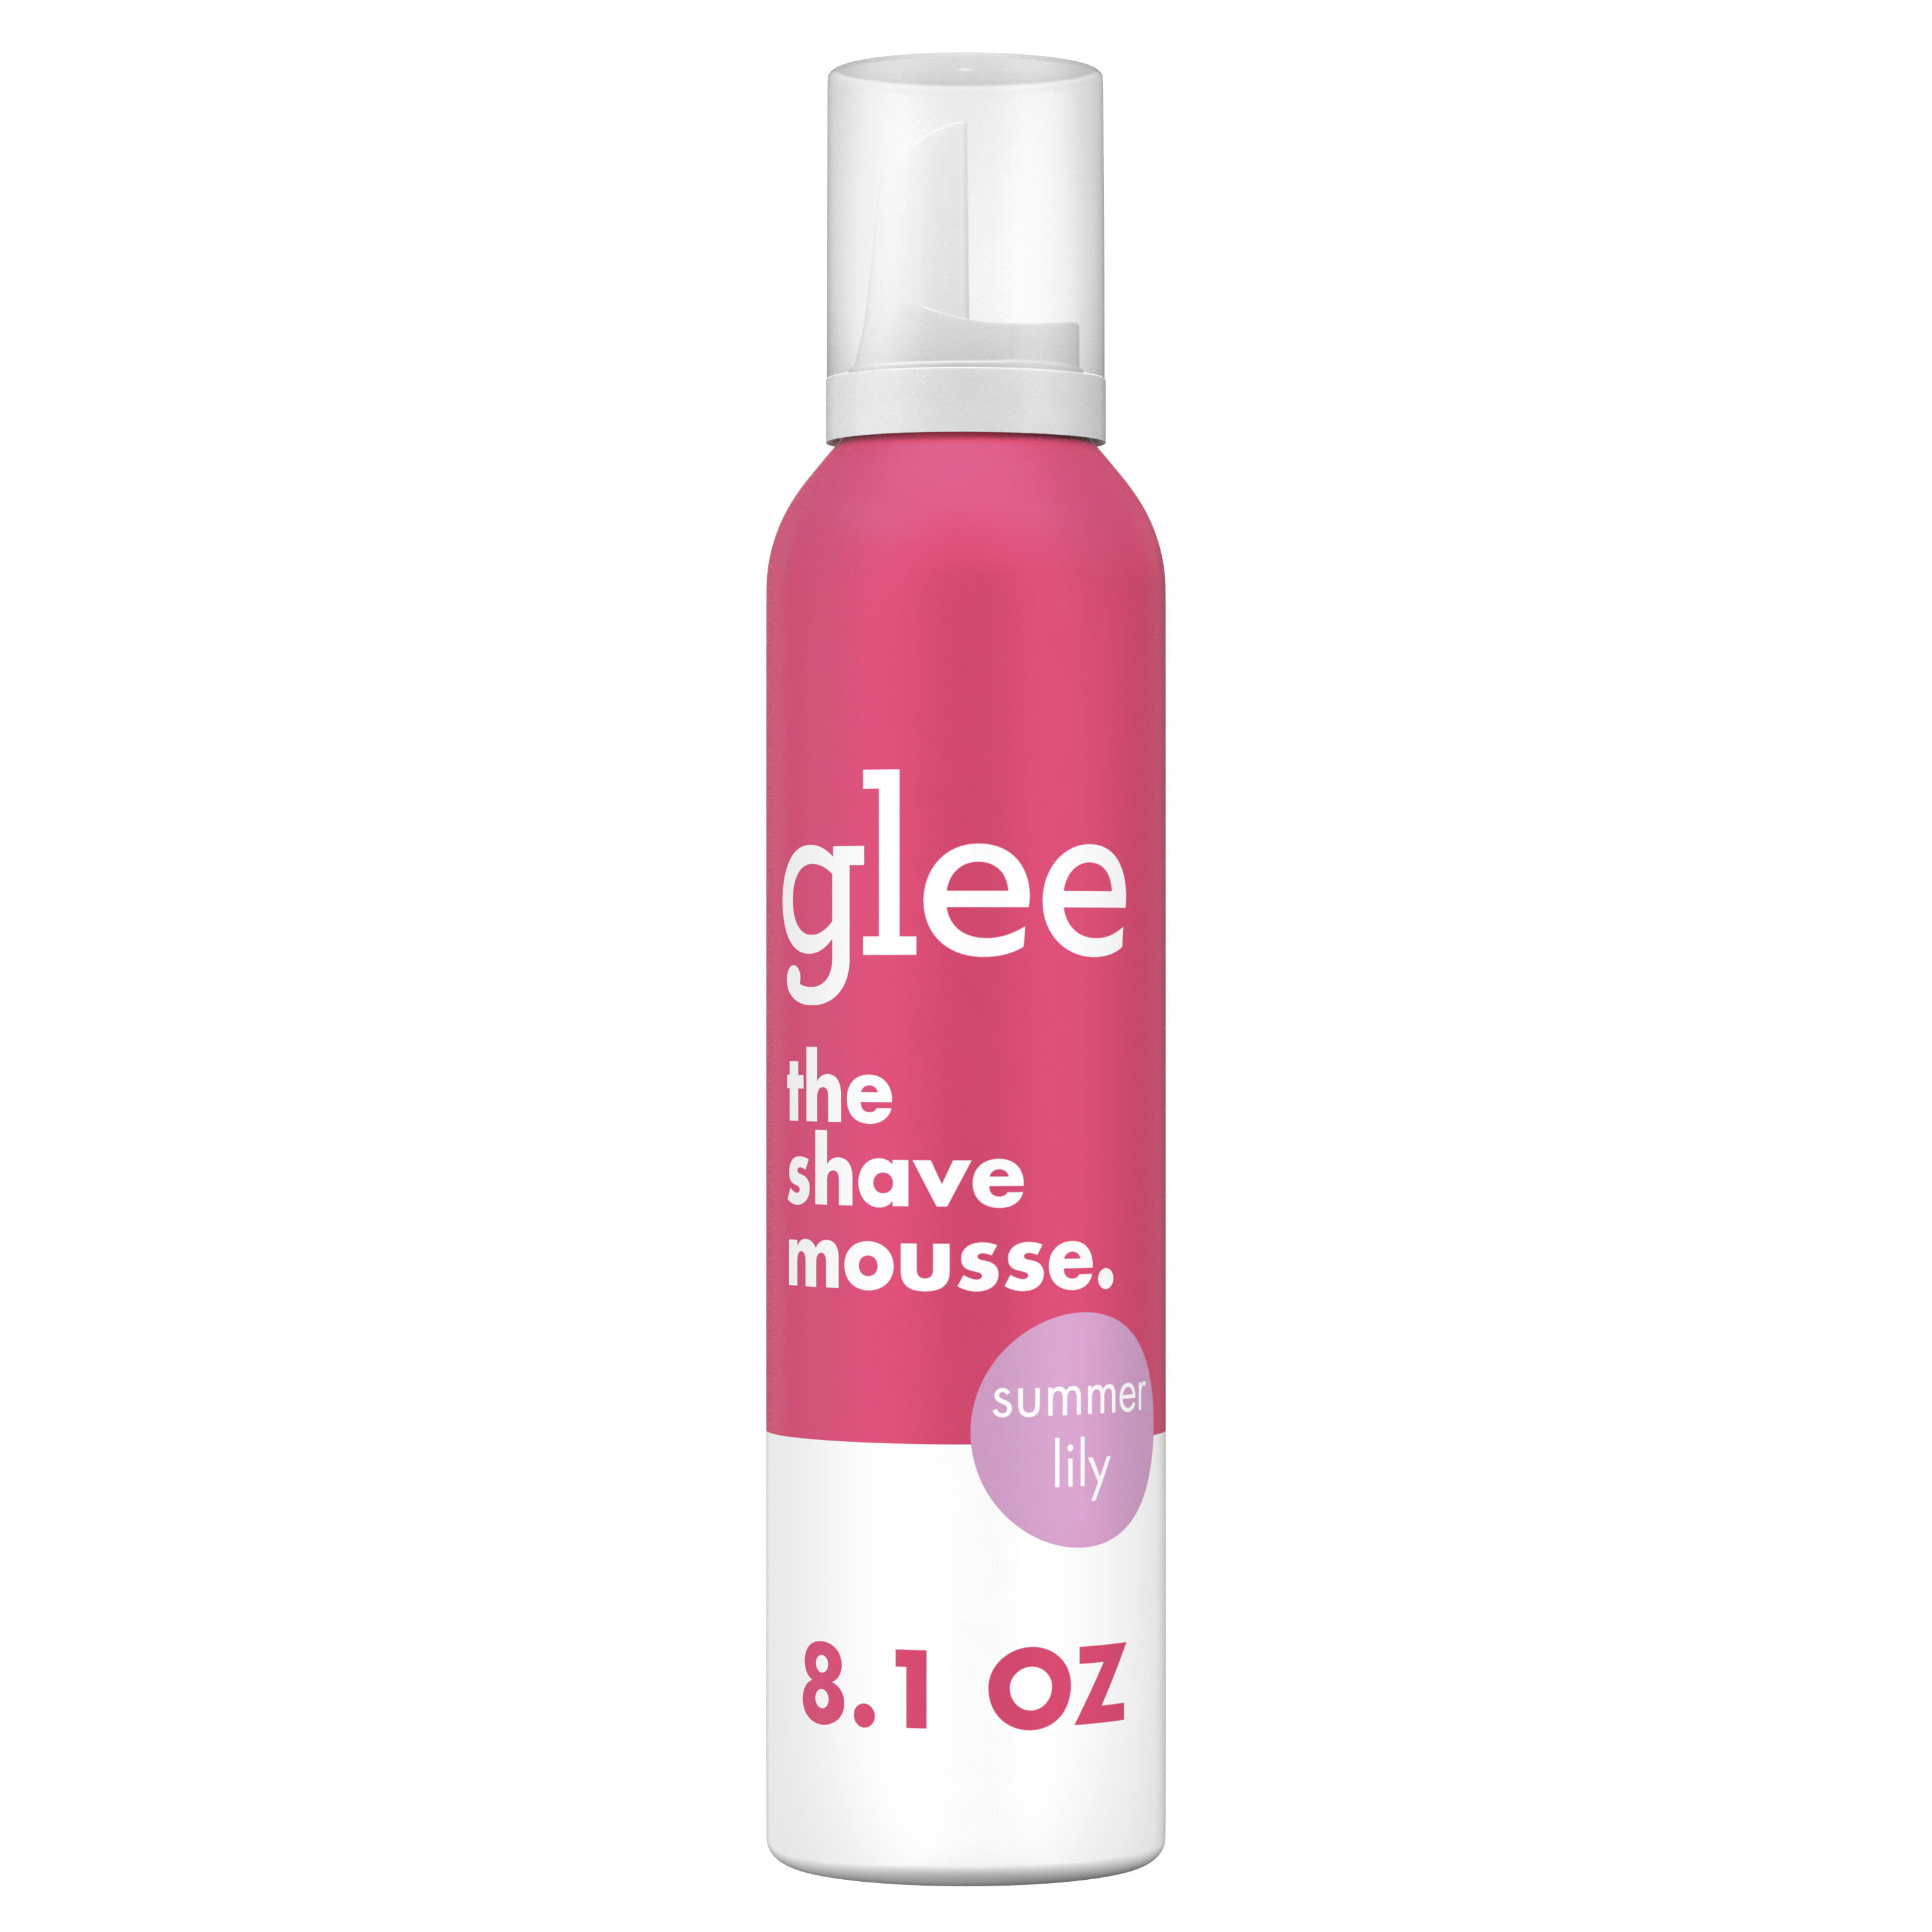 Glee Summer Lily Shave Mousse for Women, 8.1 Ounces